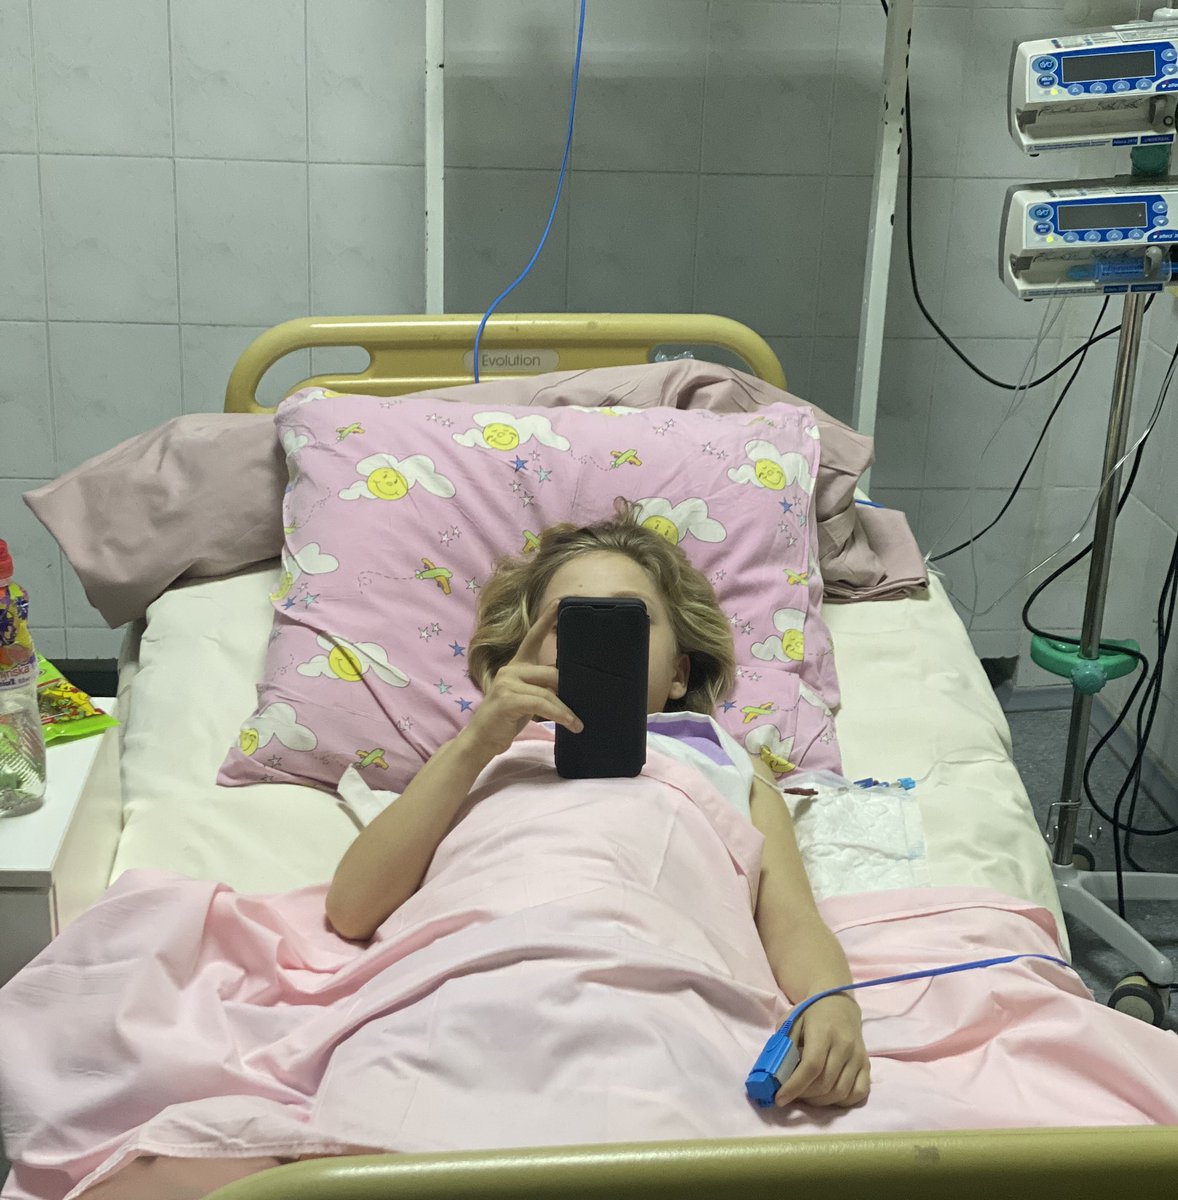 Yana is ten. She’s one of four children I have just met in a Ukrainian hospital. 
A week ago she was in Kramatorsk train station trying to escape the war when it was hit by missiles.
She has lost both her legs. And her mother.
(At the request of docs we aren’t showing her face)